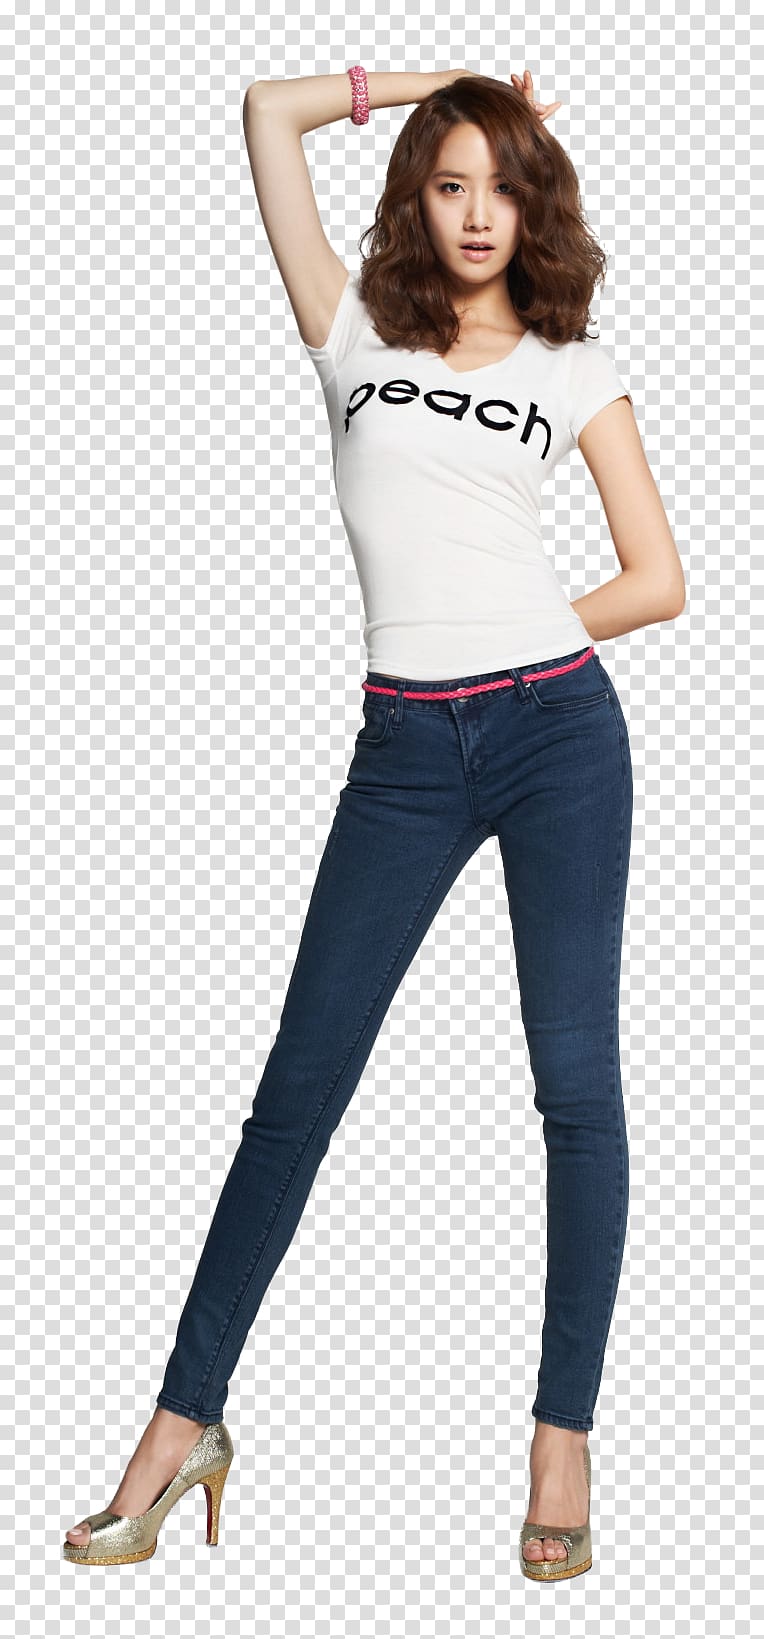 women's white and black peach printed shirt and denim jeans, Im Yoon-ah T-shirt Jeans Girls\' Generation Clothing, Celebrities transparent background PNG clipart